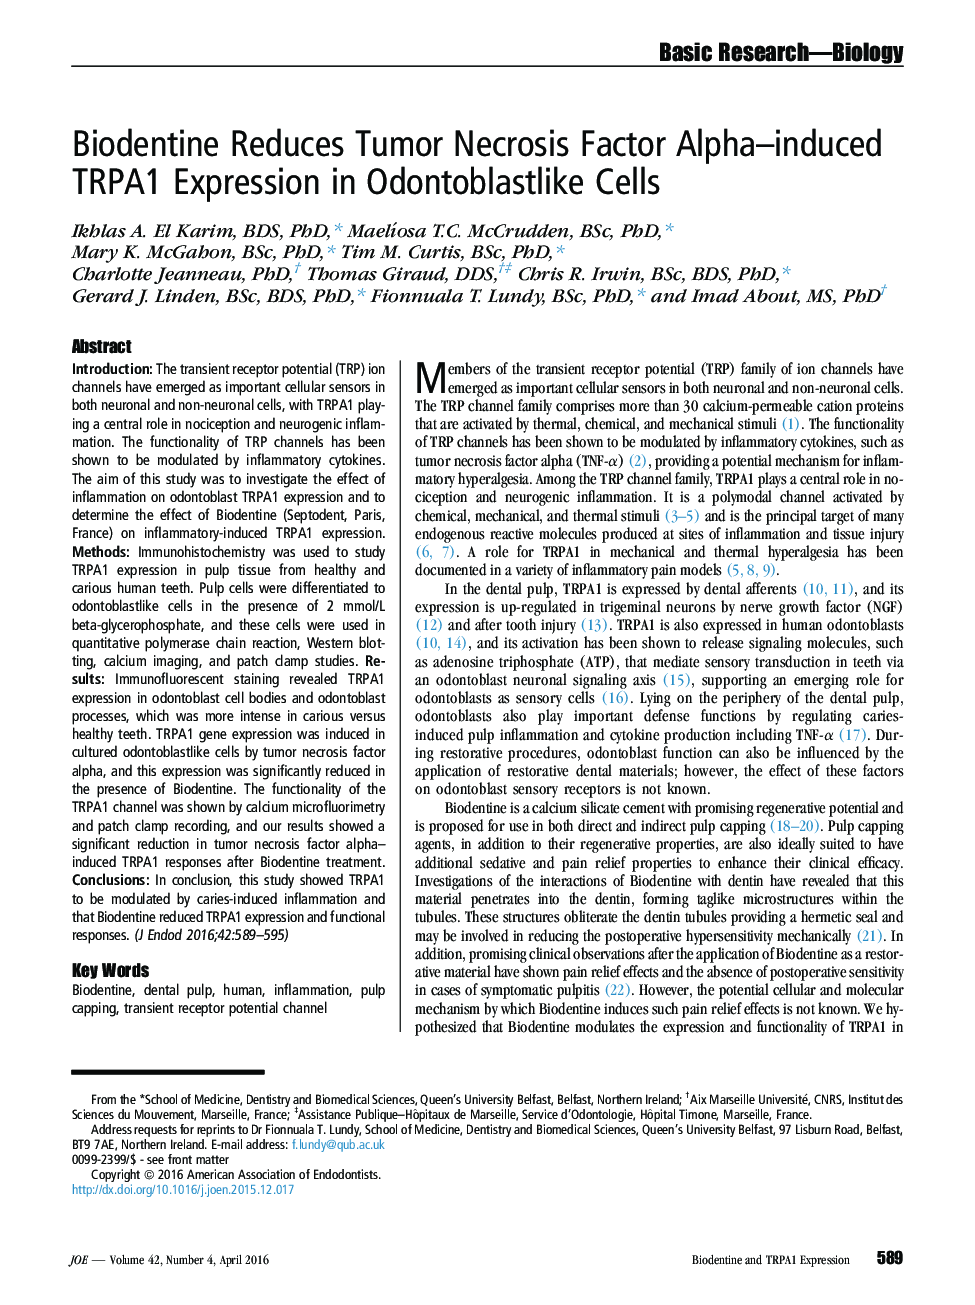 Biodentine Reduces Tumor Necrosis Factor Alpha–induced TRPA1 Expression in Odontoblastlike Cells